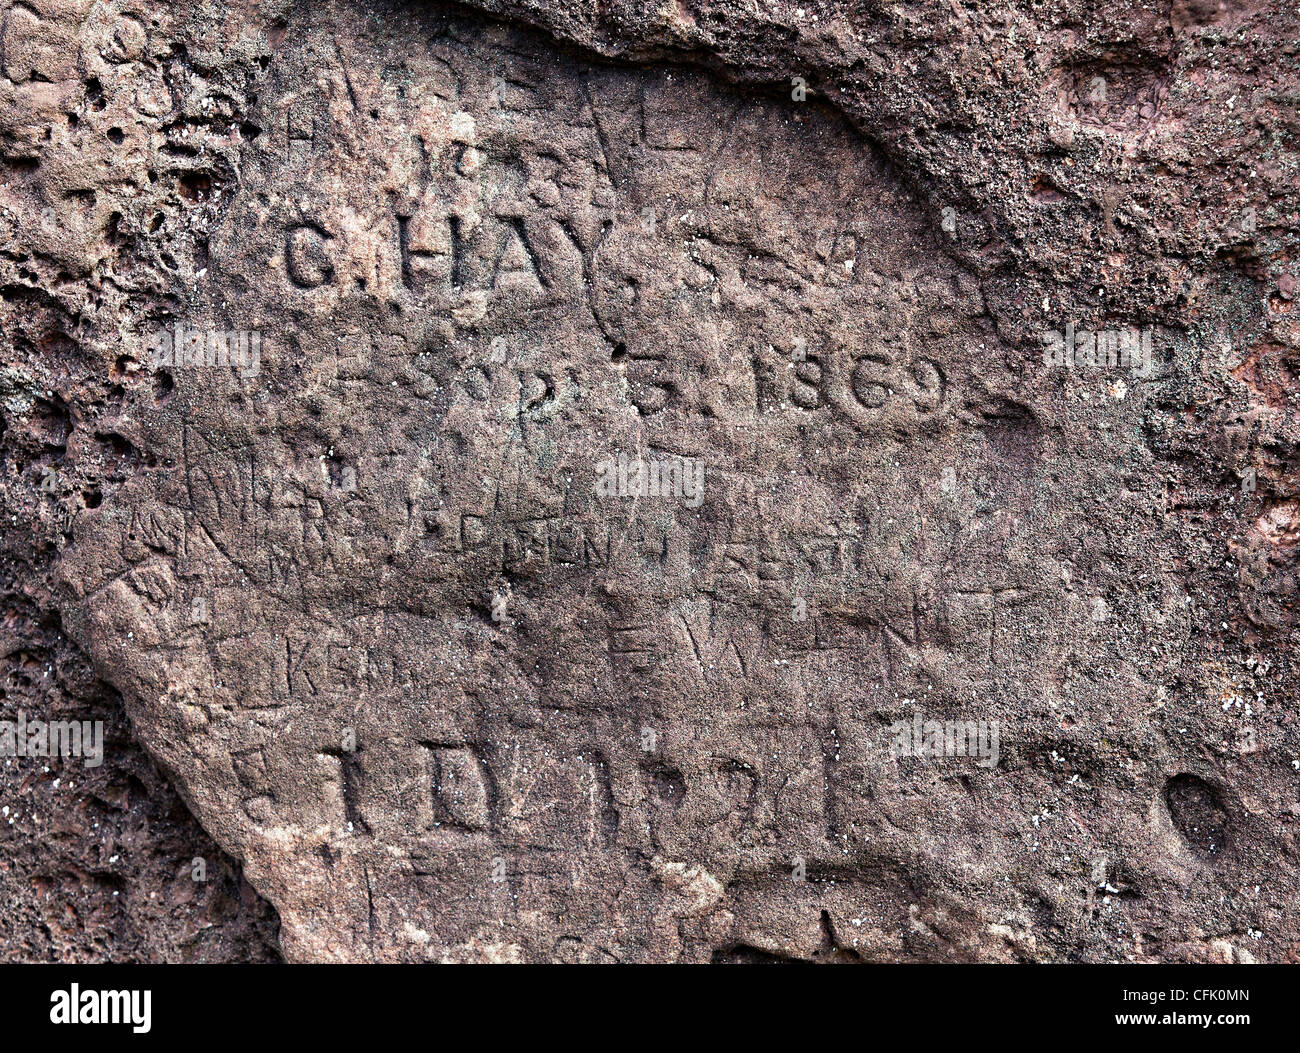 Inscriptions in the side of Maen Llia standing stone, Brecon Beacons National Park, Powys, Wales, UK Stock Photo